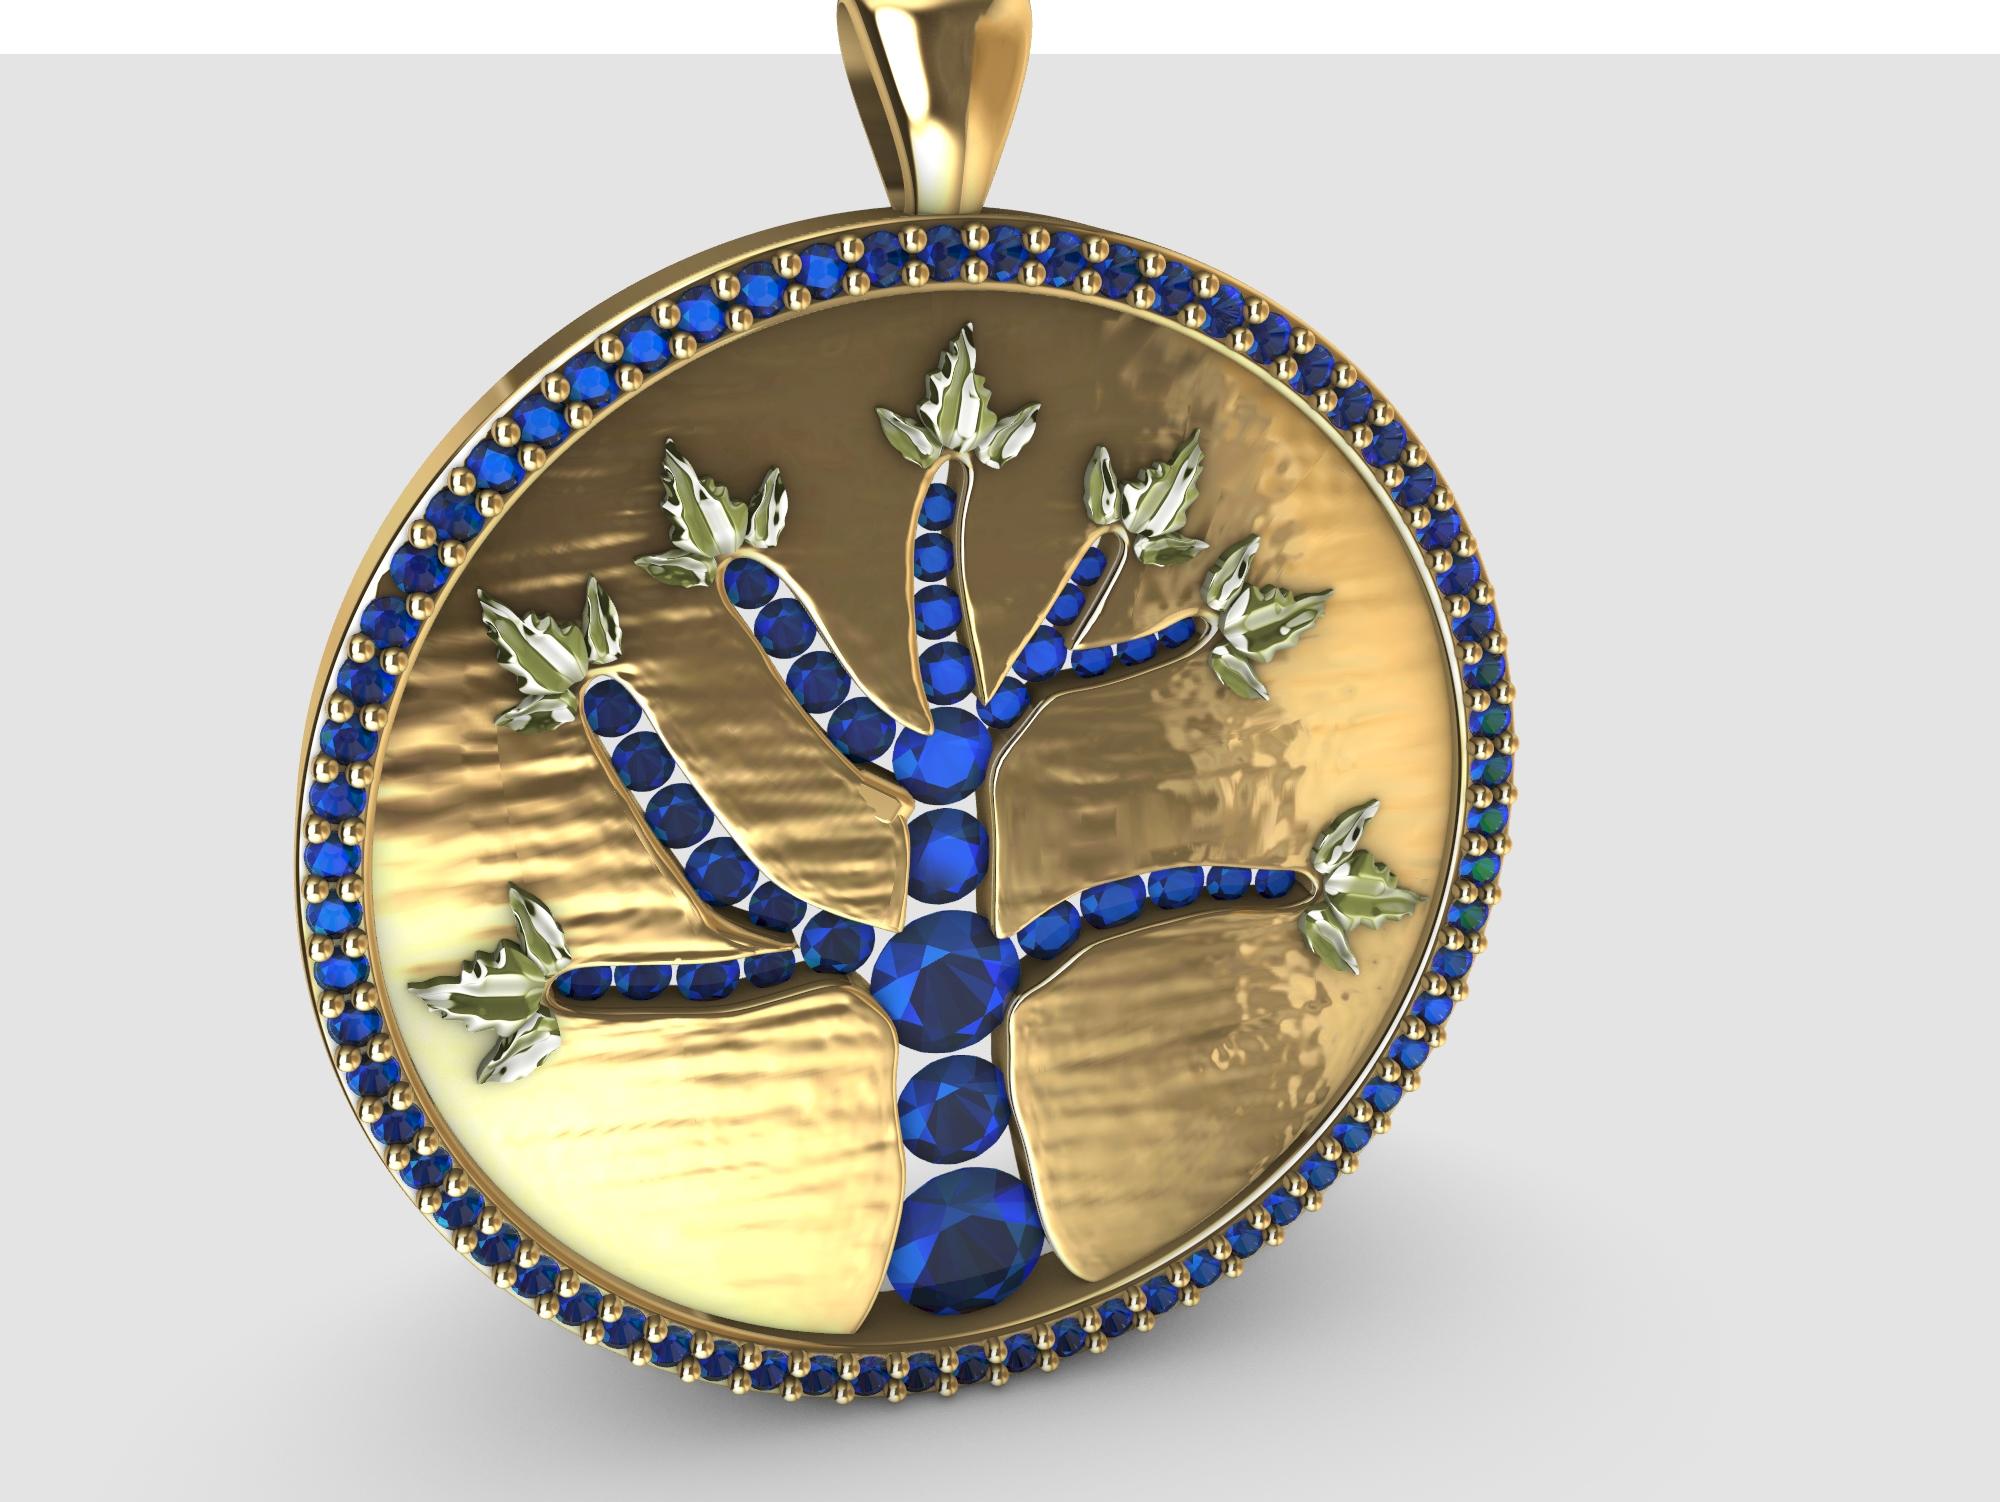 18 Karat Yellow Gold and Sapphires Tree of Life Pendant, Tiffany designer Thomas Kurilla  has Redesigned the Tree of Life with more vigor. To bring more joy into your lfe. Light is Life, why not diamonds for the tree trunk?  Life is precious . We